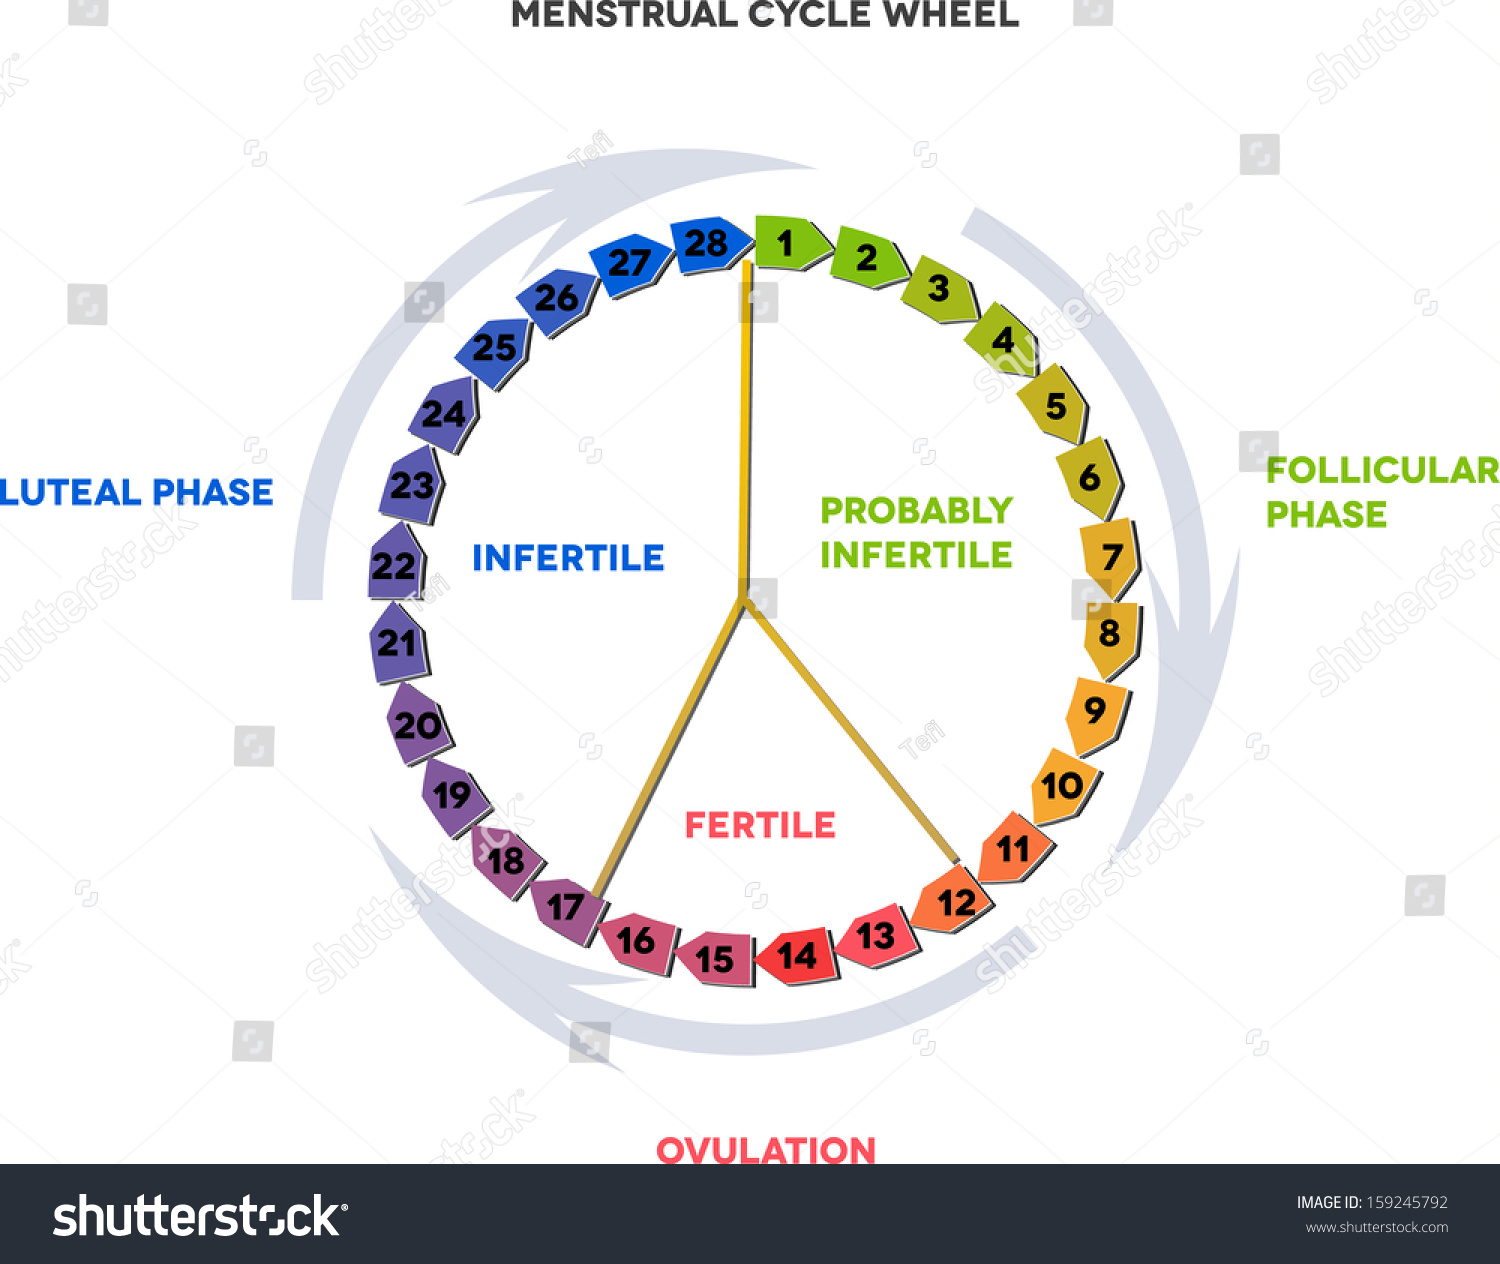 How To Chart Your Menstrual Cycle